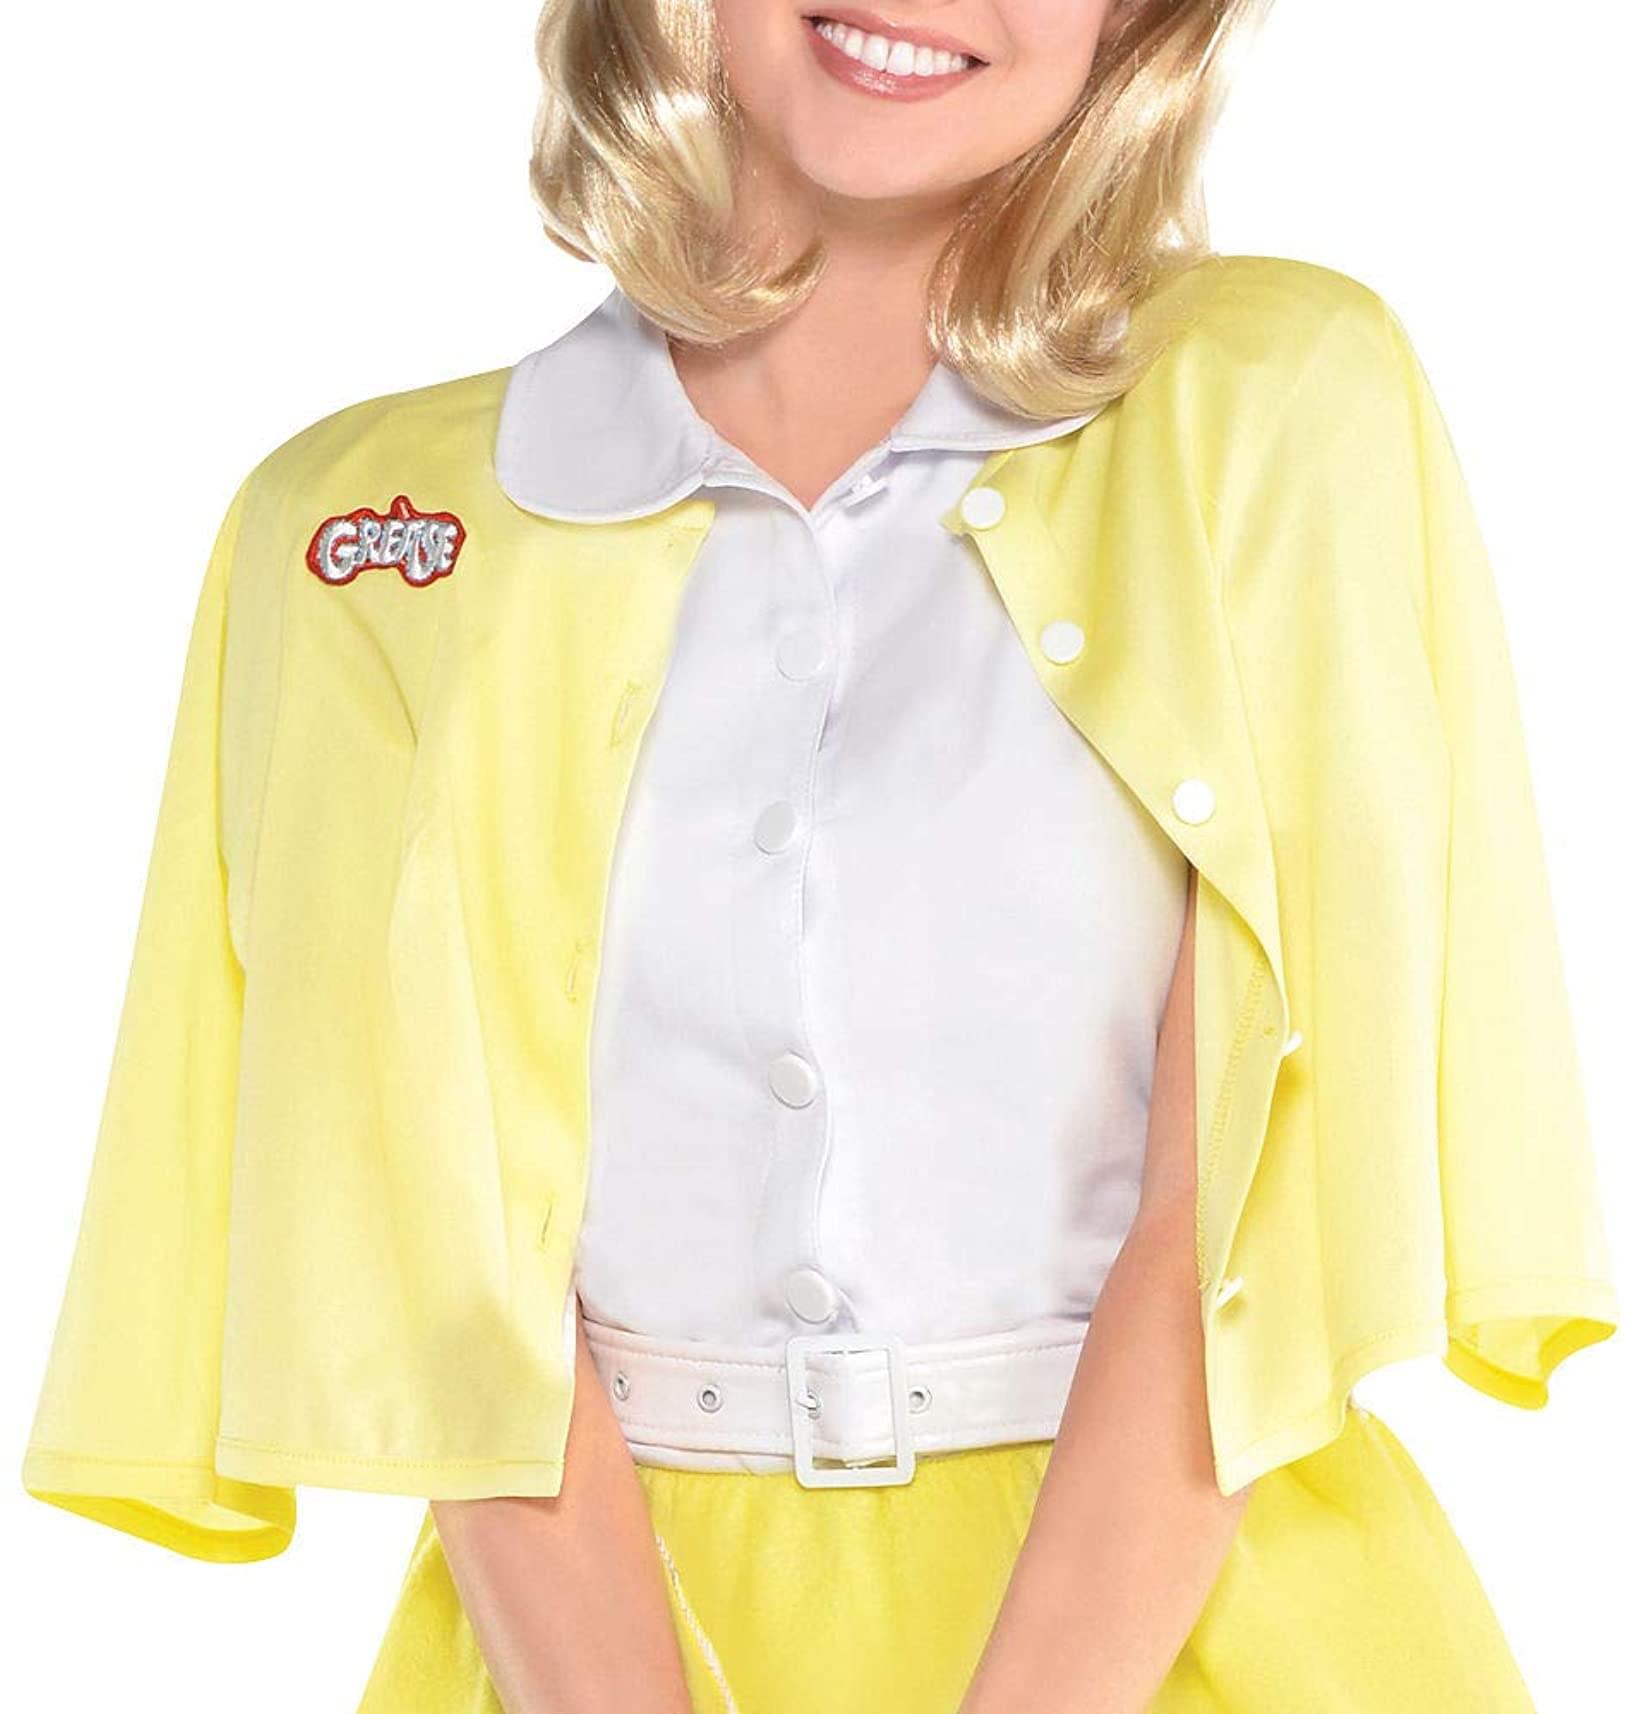 Grease Summer Nights Costume Adult Womens